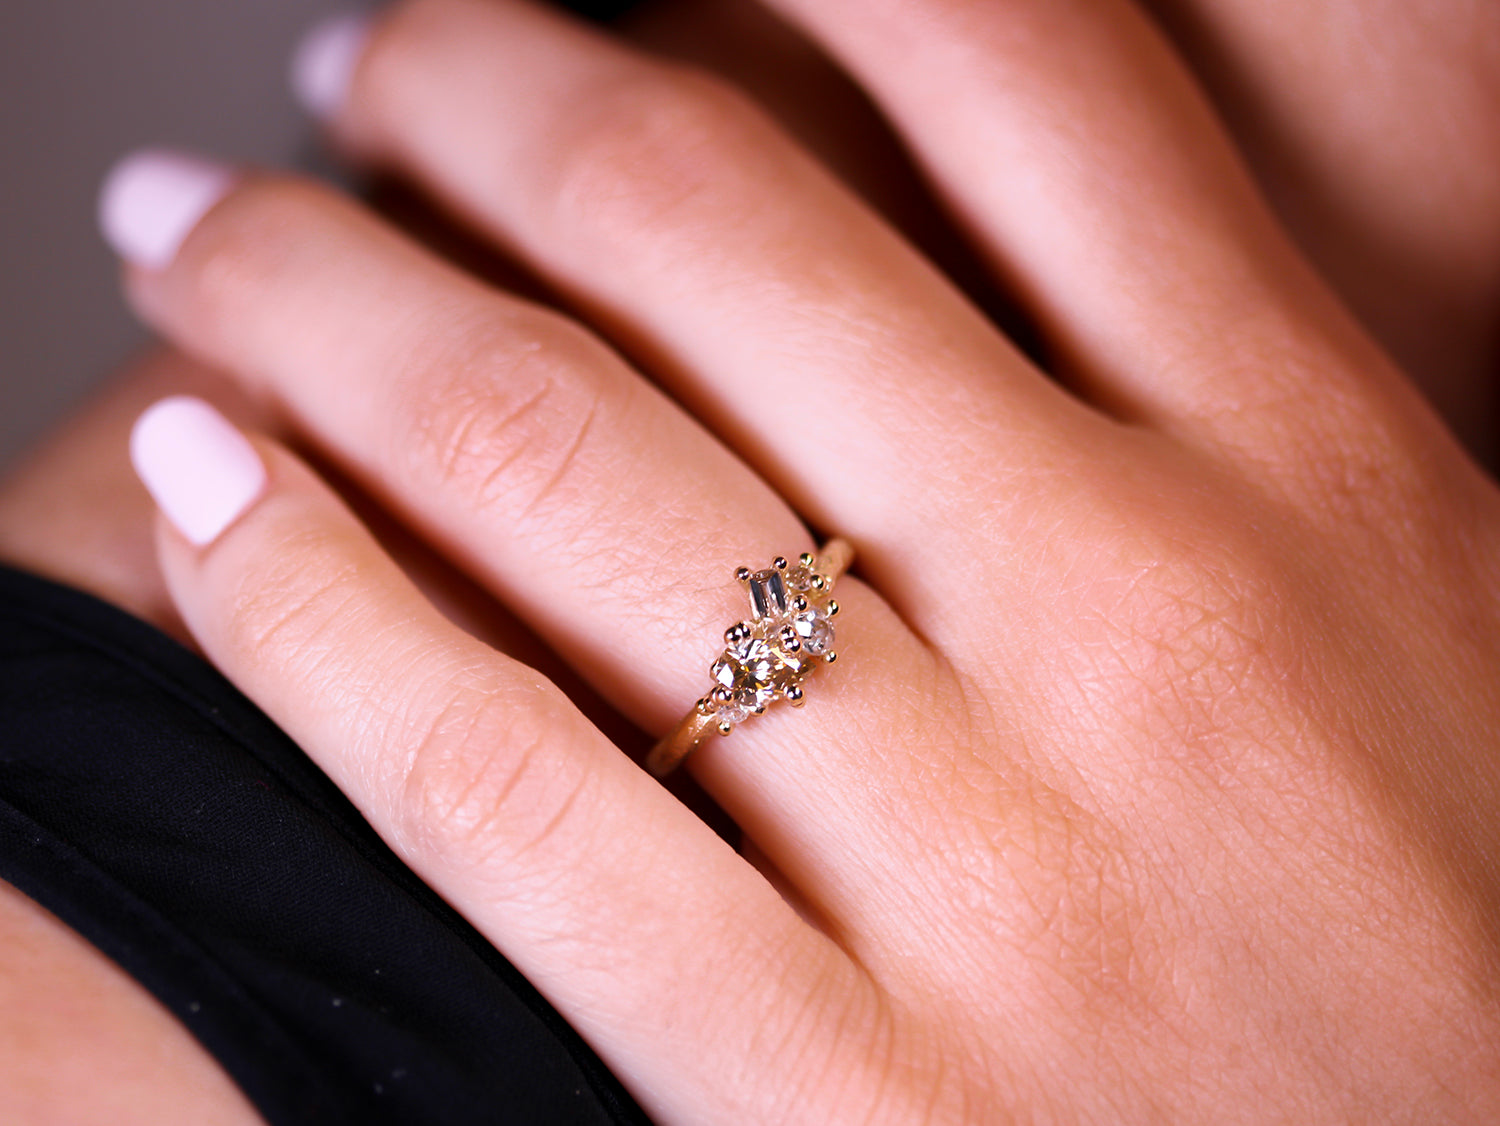 2023 Engagement Ring Predictions (According To Experts) | MiaDonna